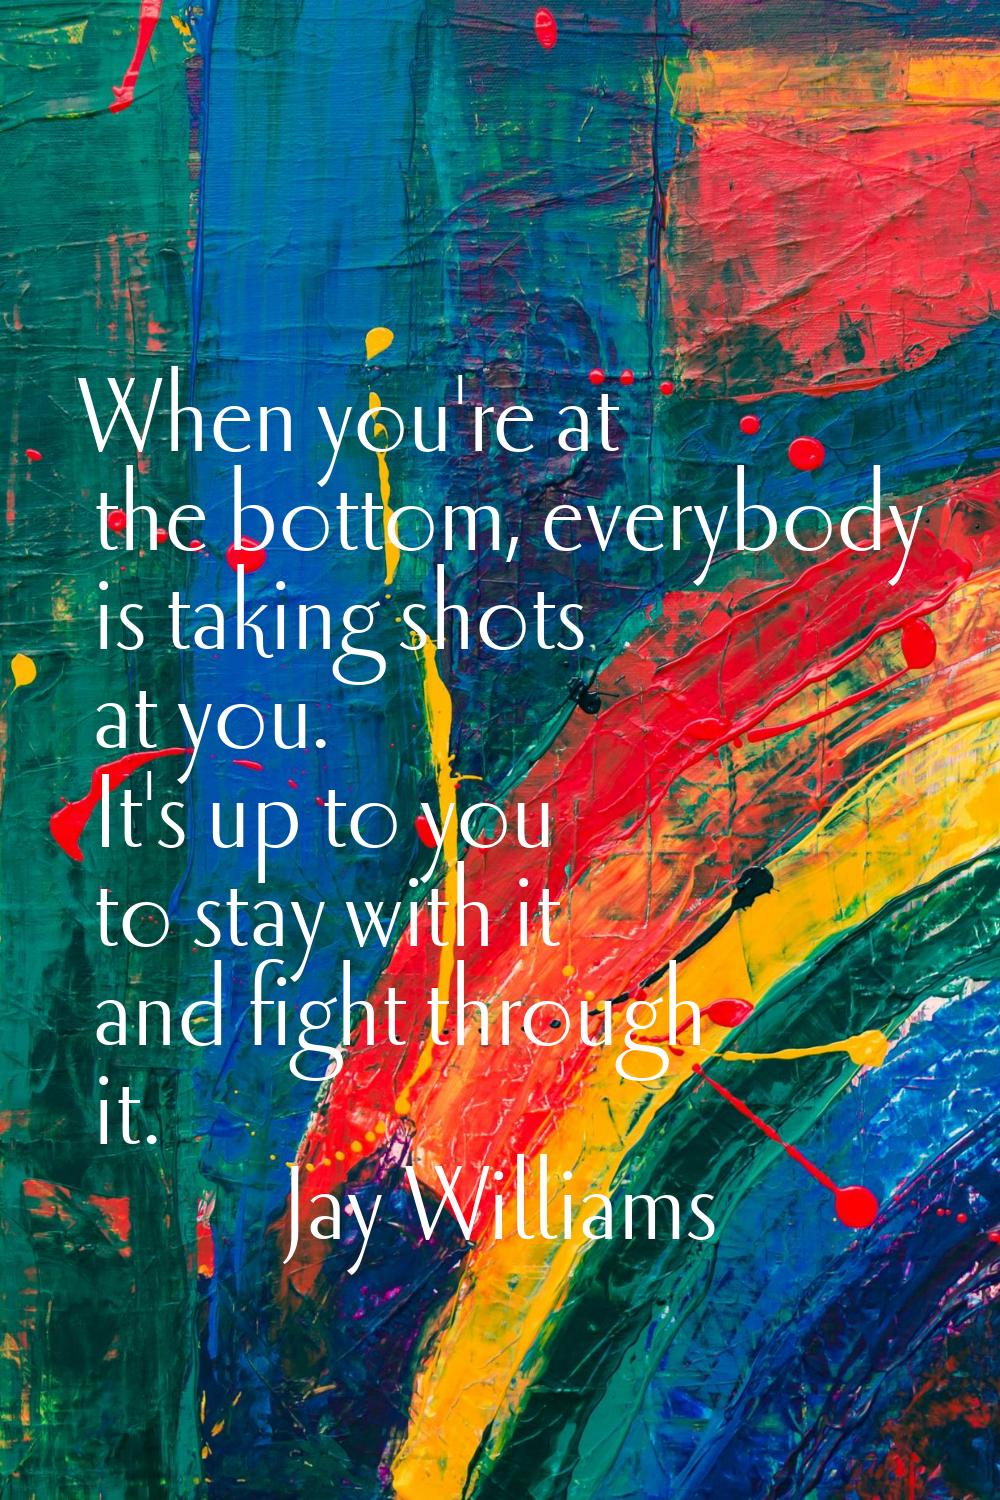 When you're at the bottom, everybody is taking shots at you. It's up to you to stay with it and fig